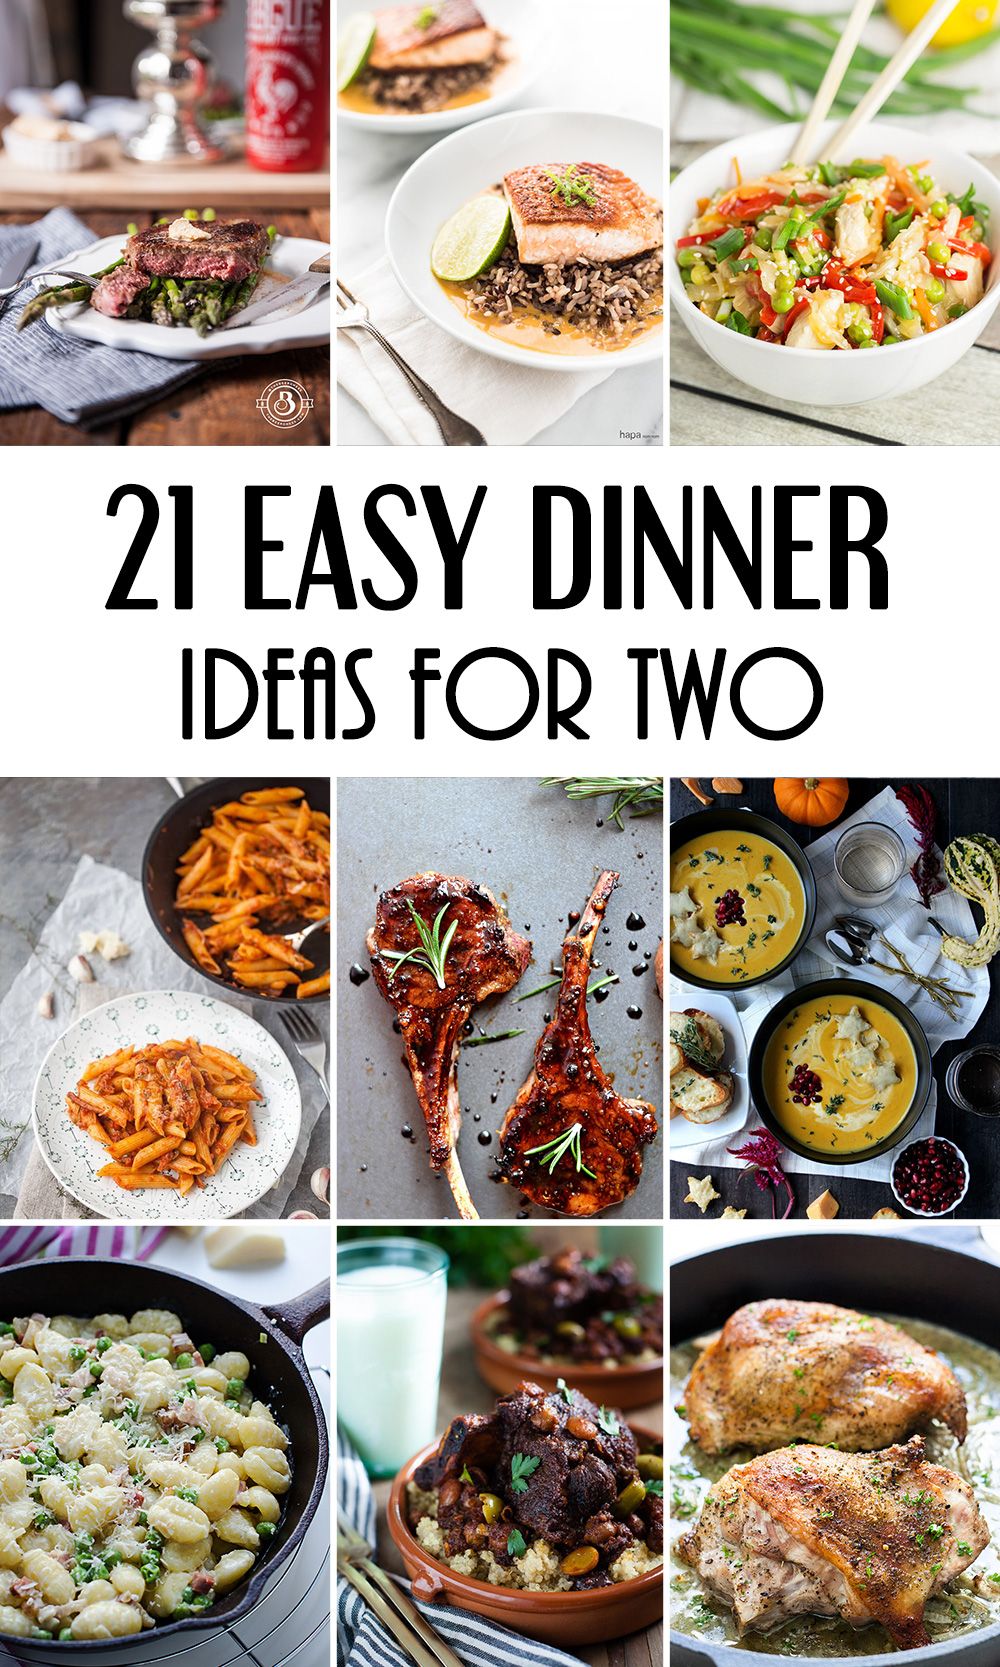 Easy Meals To Make At Home For Two